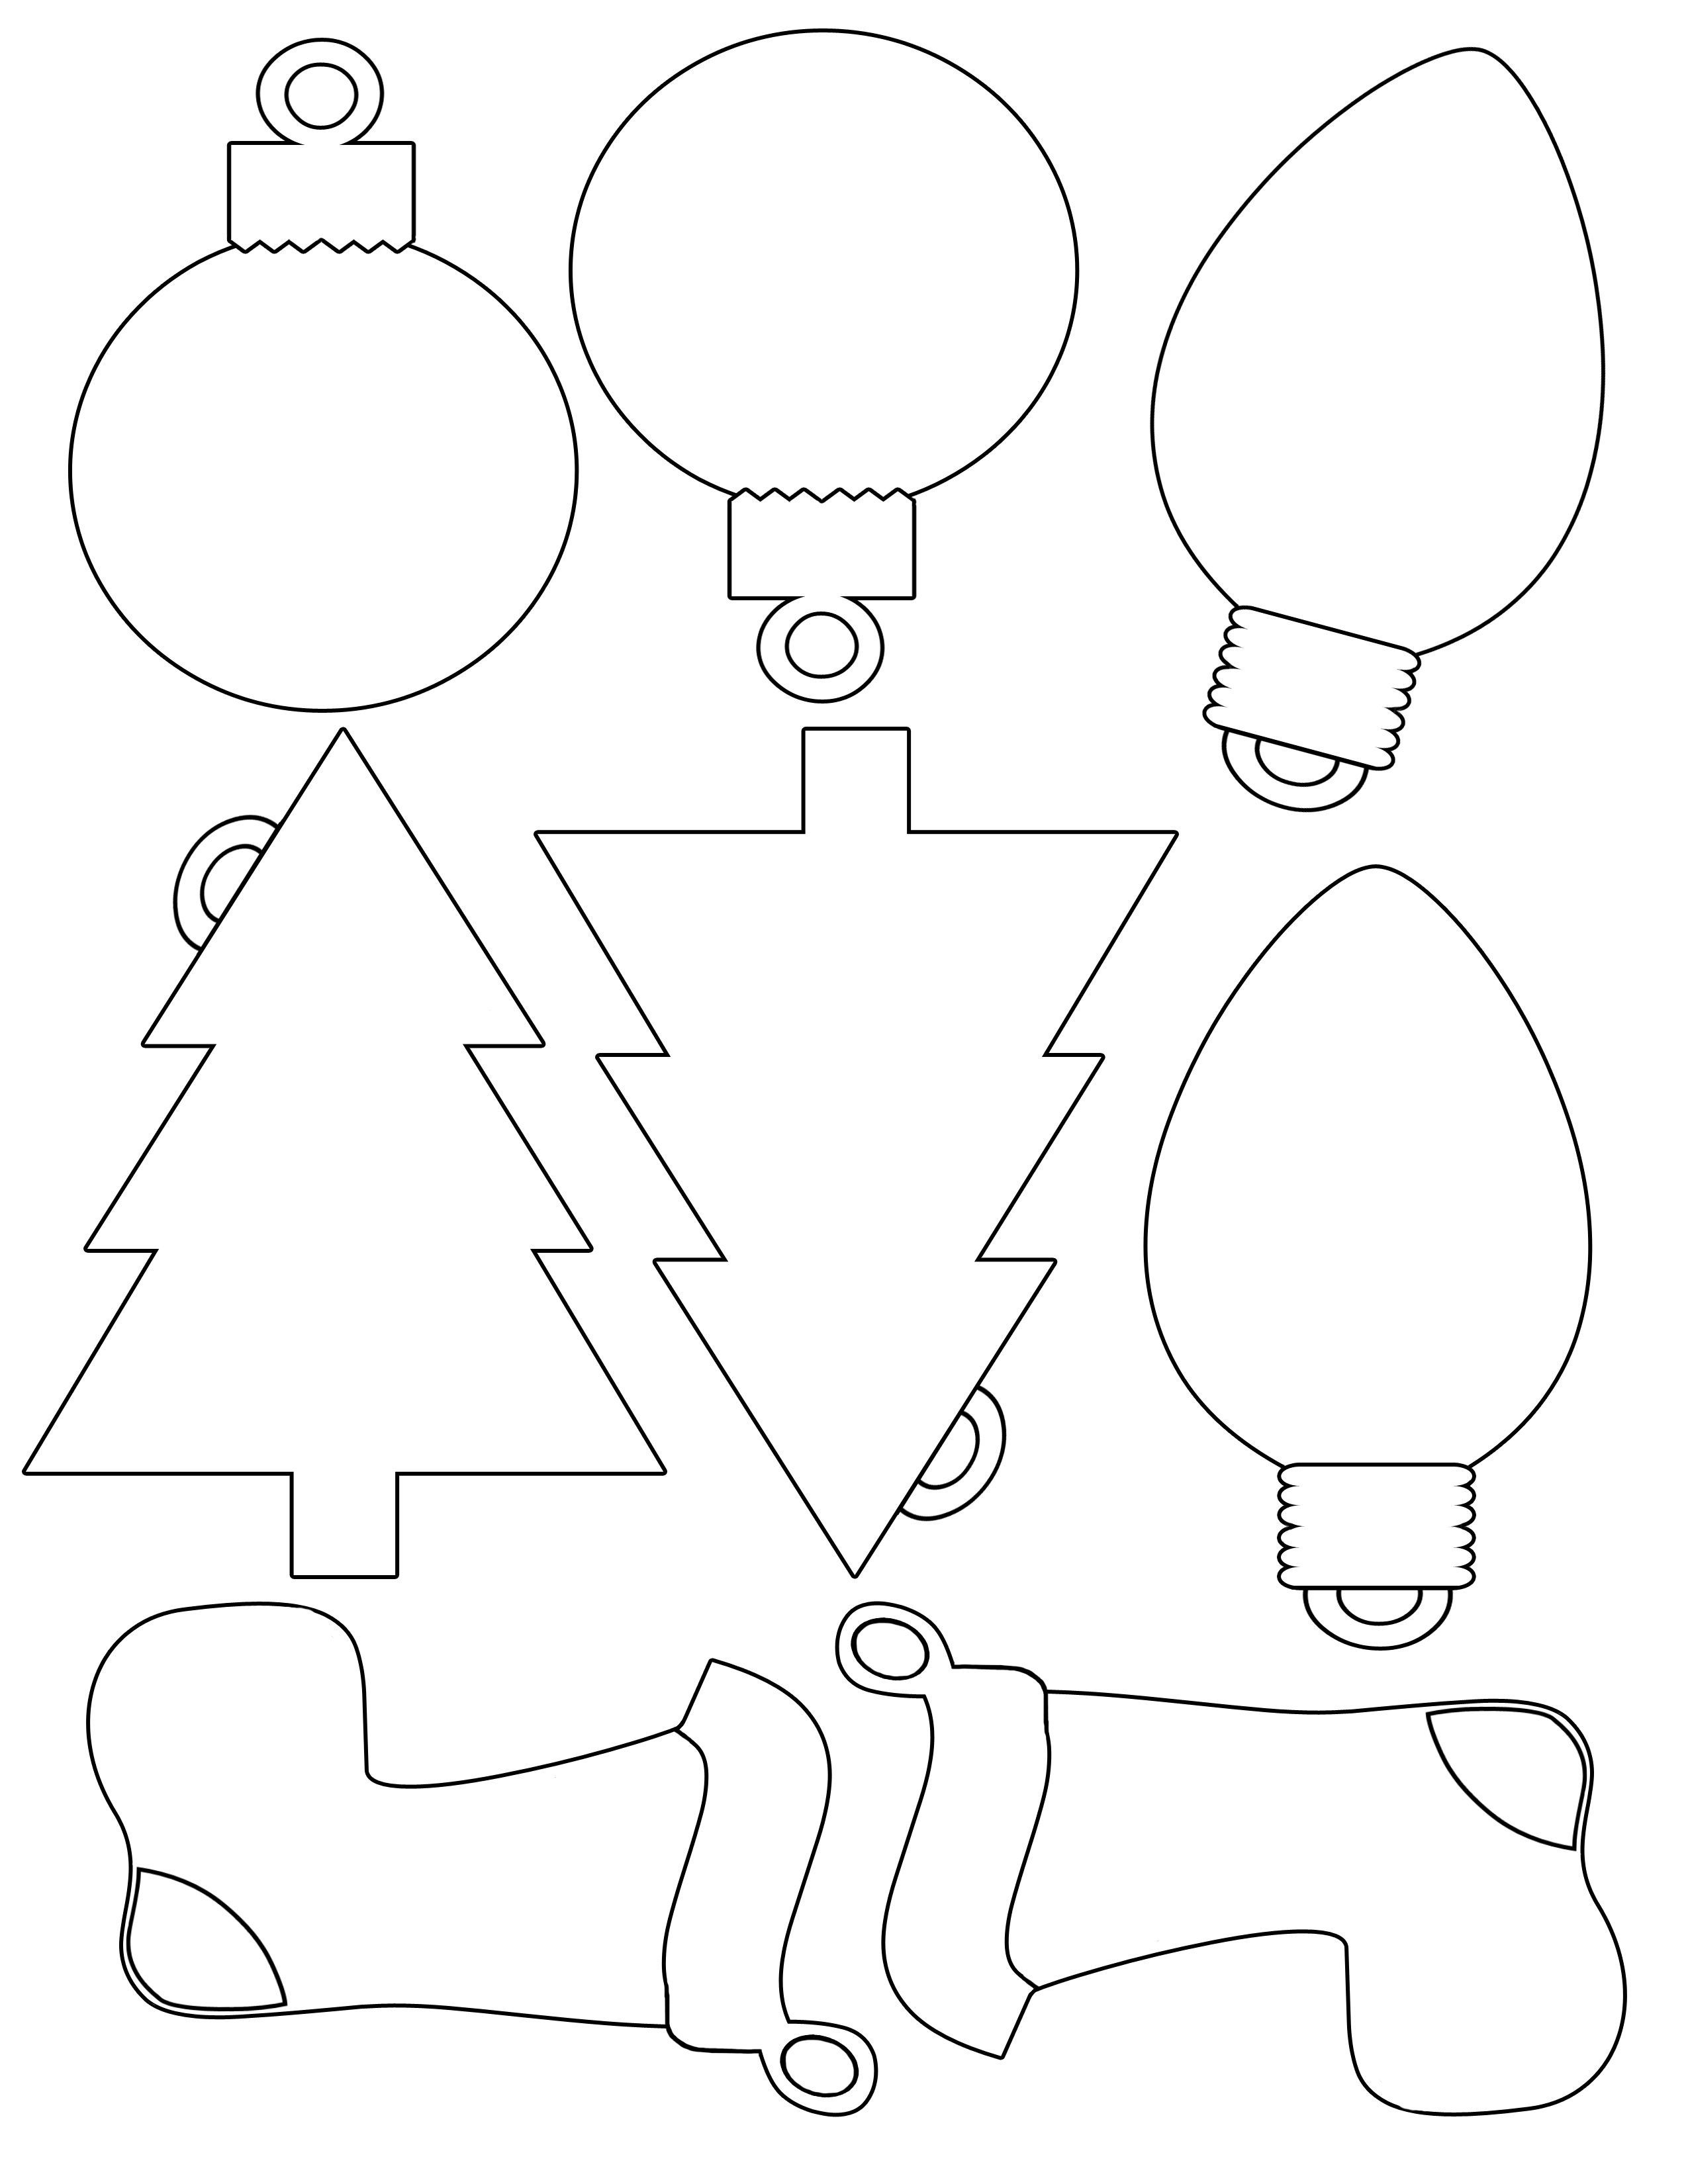 Free Pin Gift Tag Templates! Click On Image And Save To Your Folder - Free Shape Templates Printable